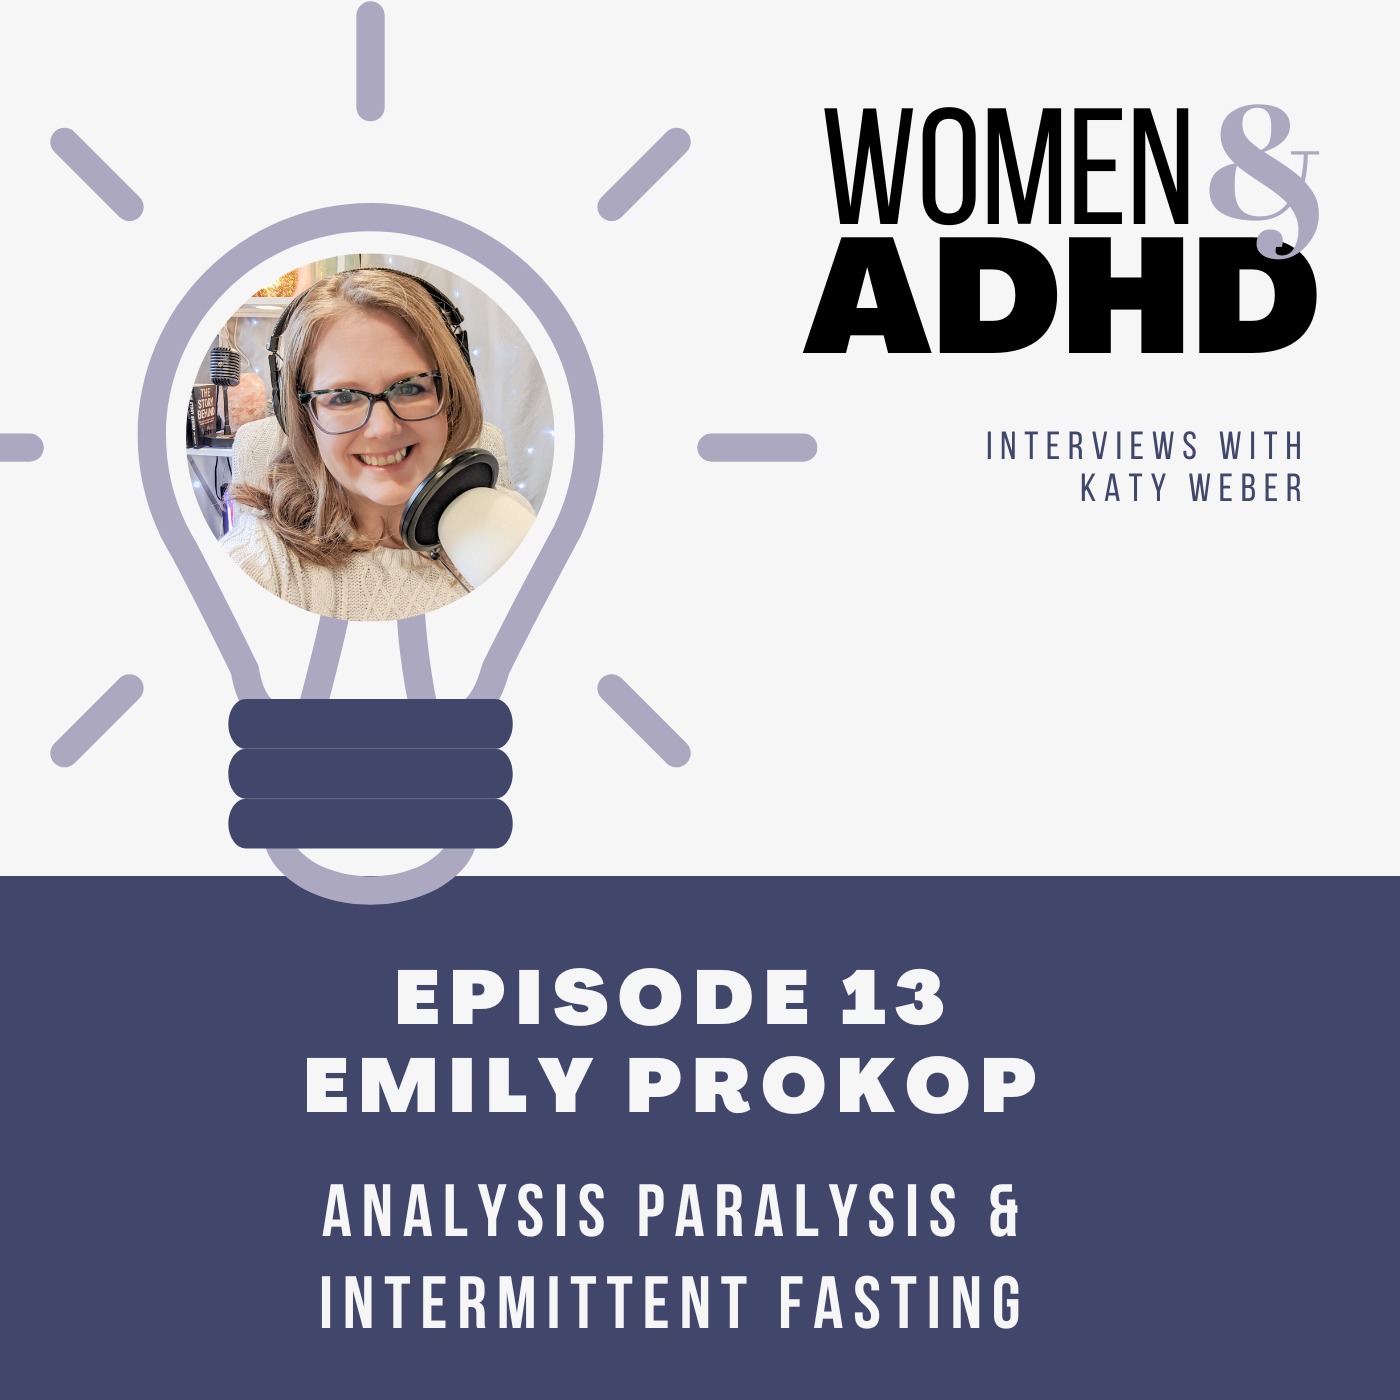 Emily Prokop: Analysis paralysis and intermittent fasting